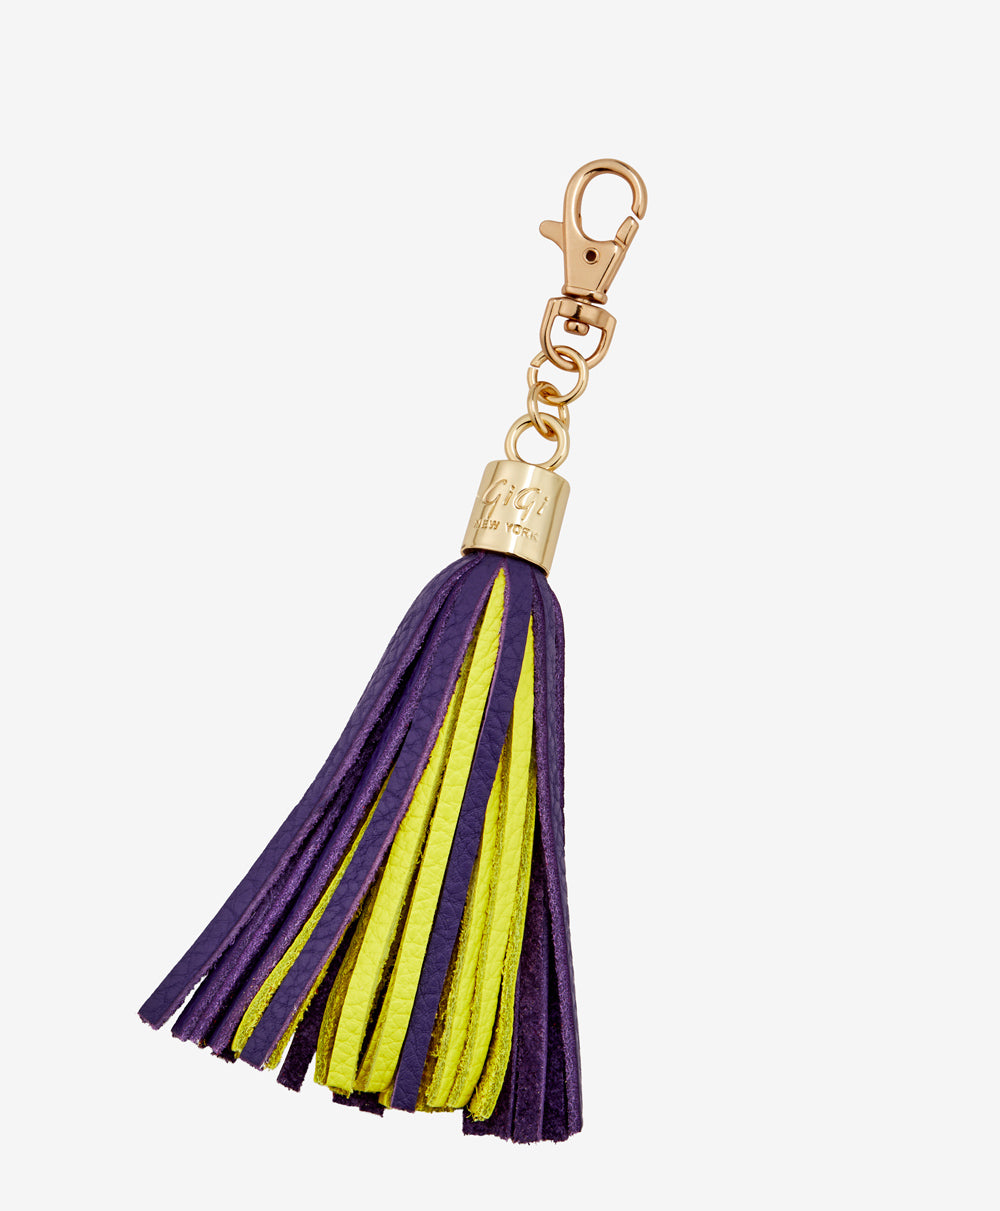 Leather Tassel Key Chain | Navy and Gold Leather